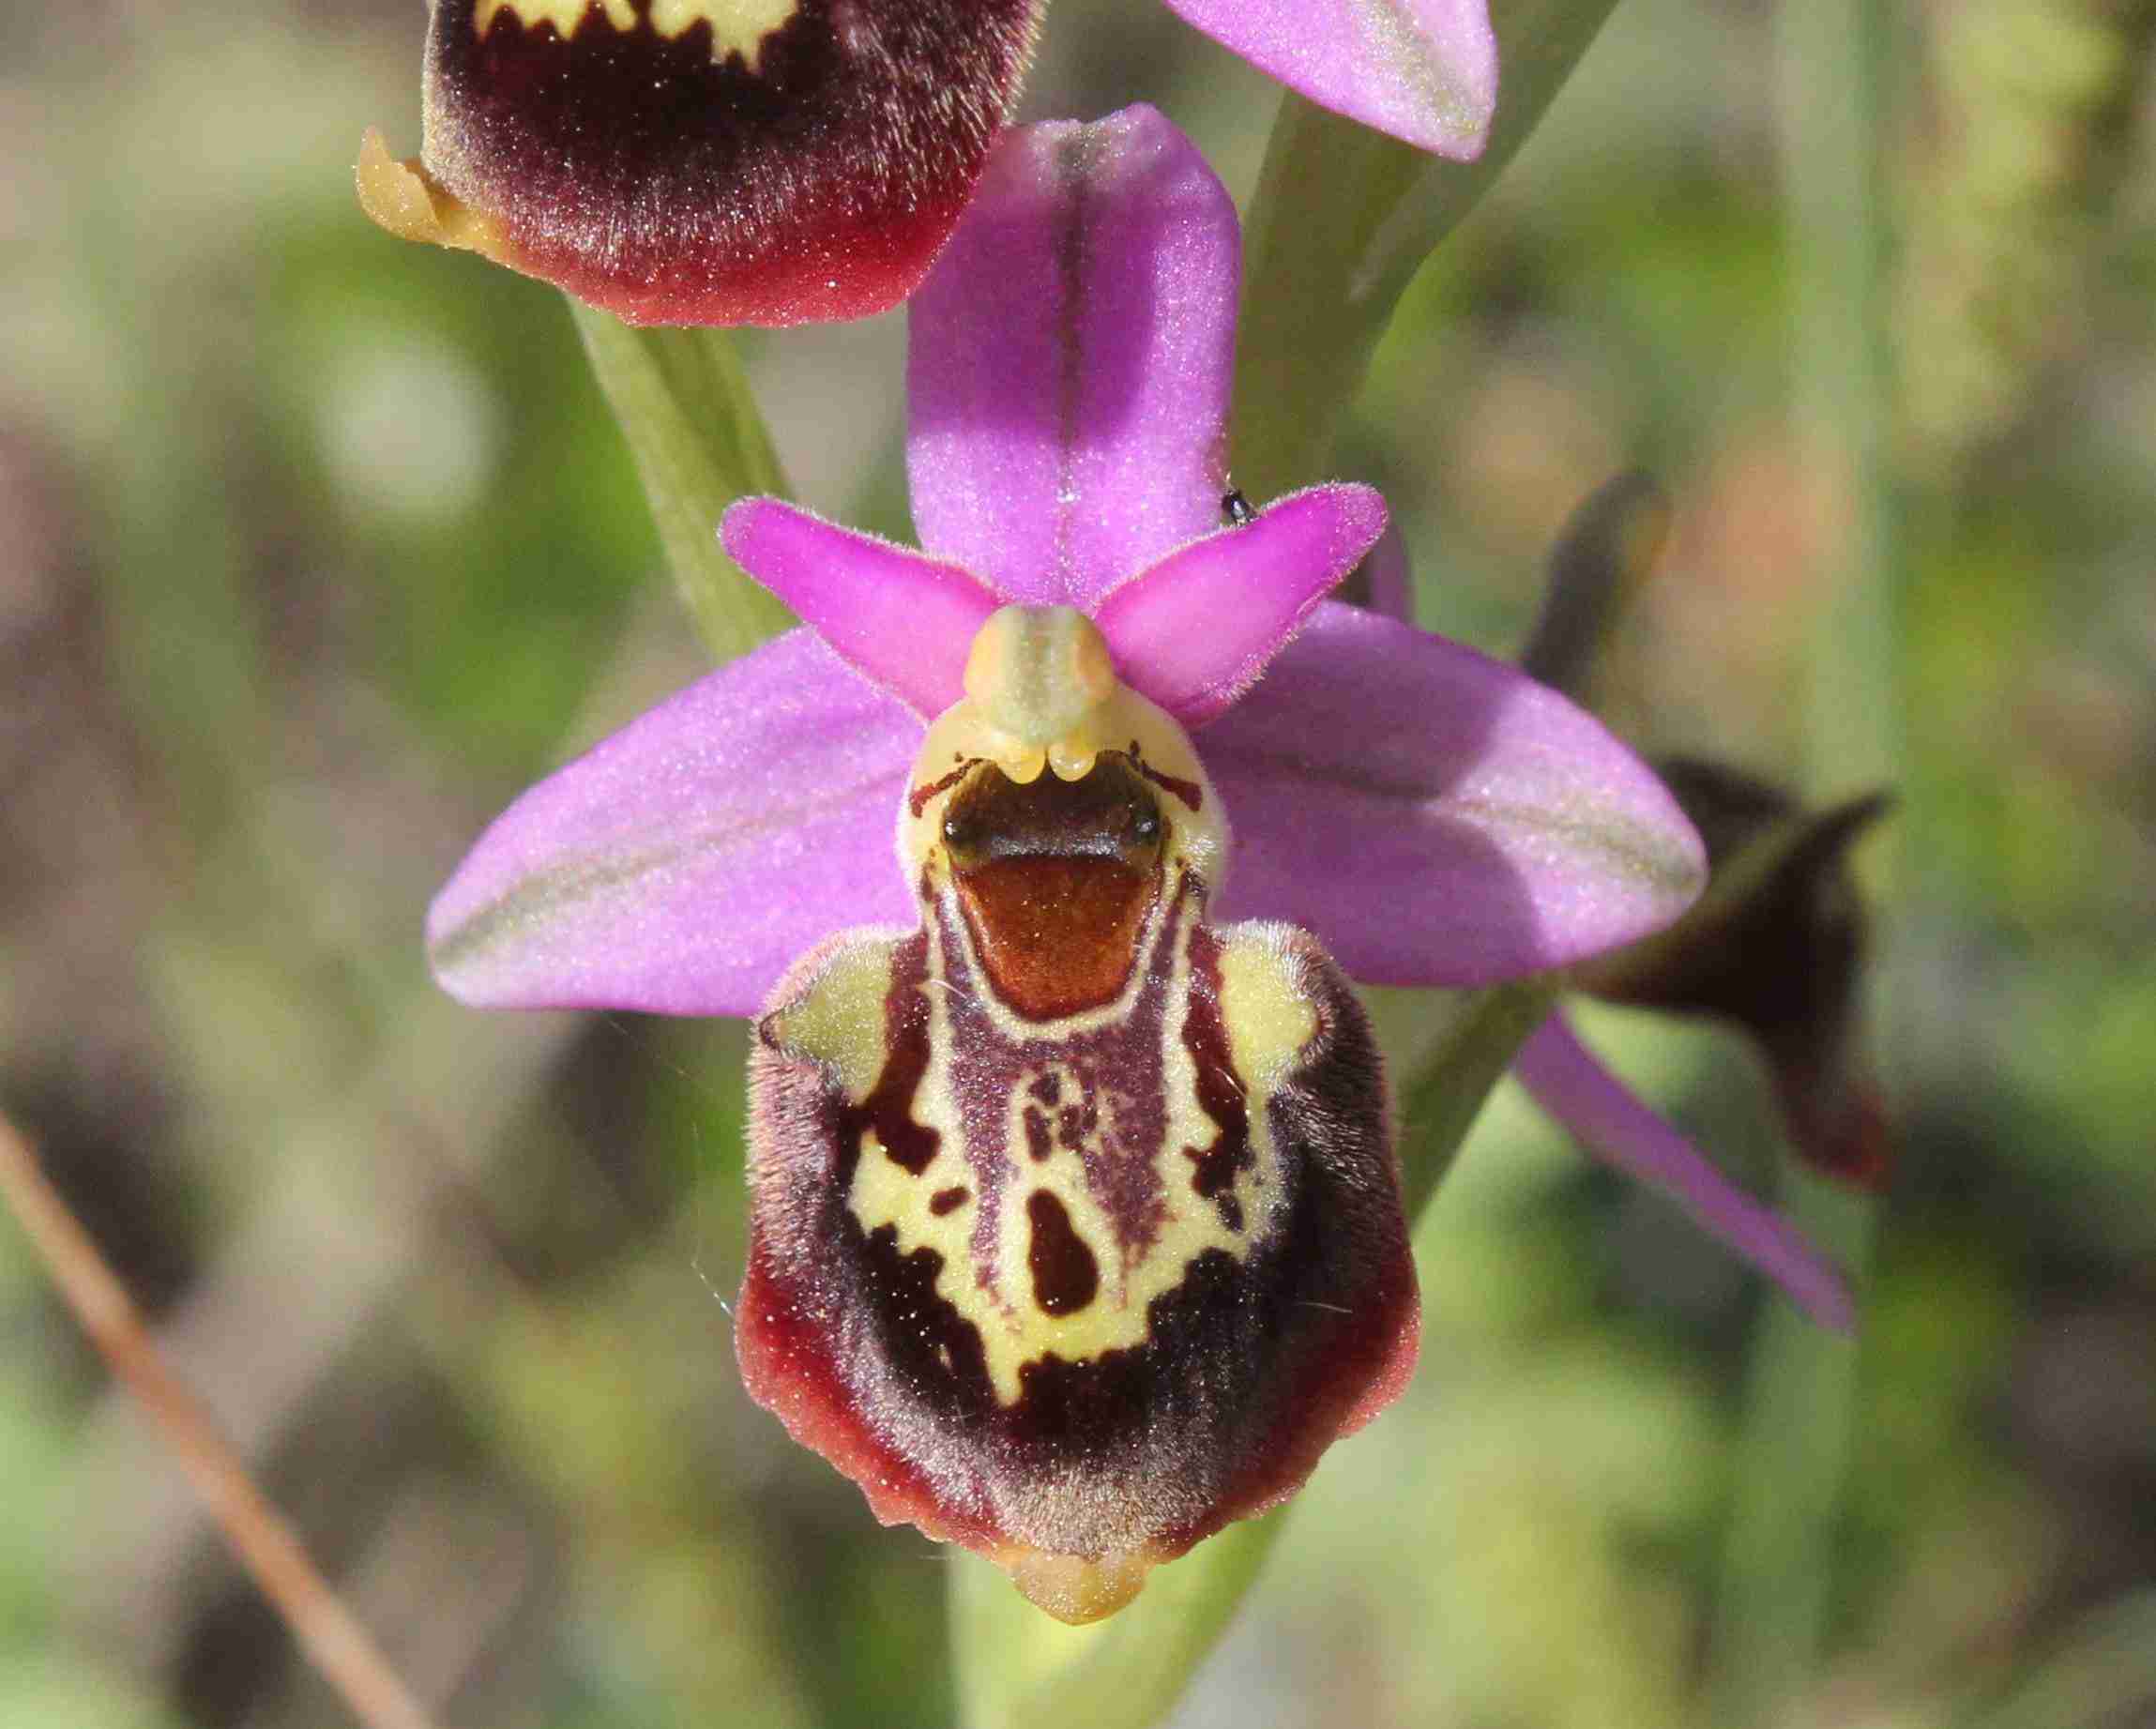 Ophrys vetula Risso. © By Hüseyin Cahid Doğan - CC BY-SA 4.0, https://commons.wikimedia.org/w/index.php?curid=92750240